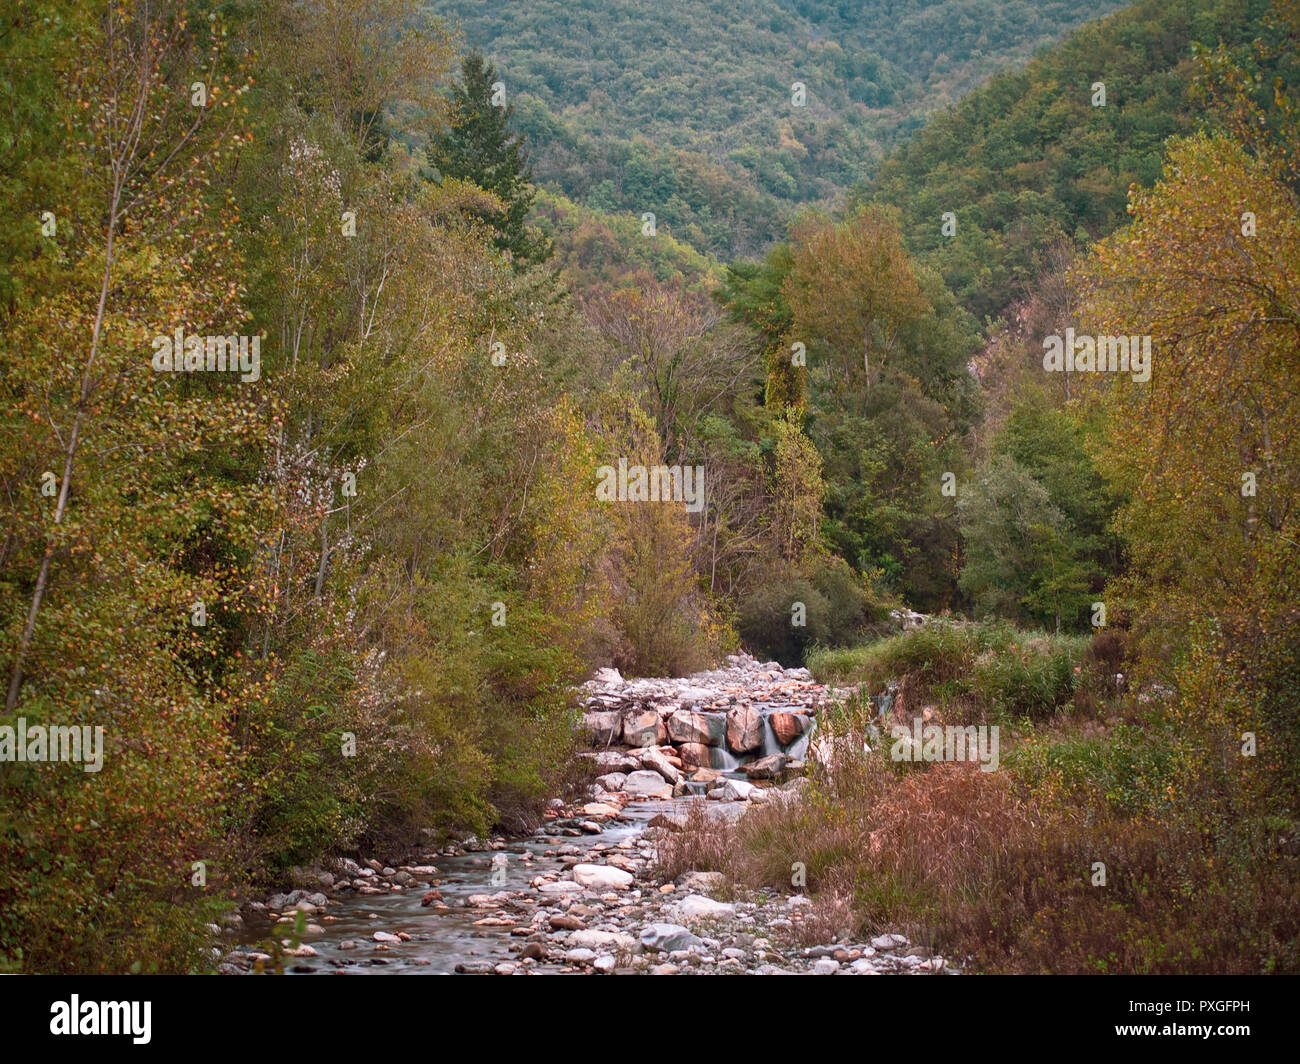 Autumn landscape with brook, spring in the Apuan Alps near Equi Term, Lunigiana, Italy. Stock Photo